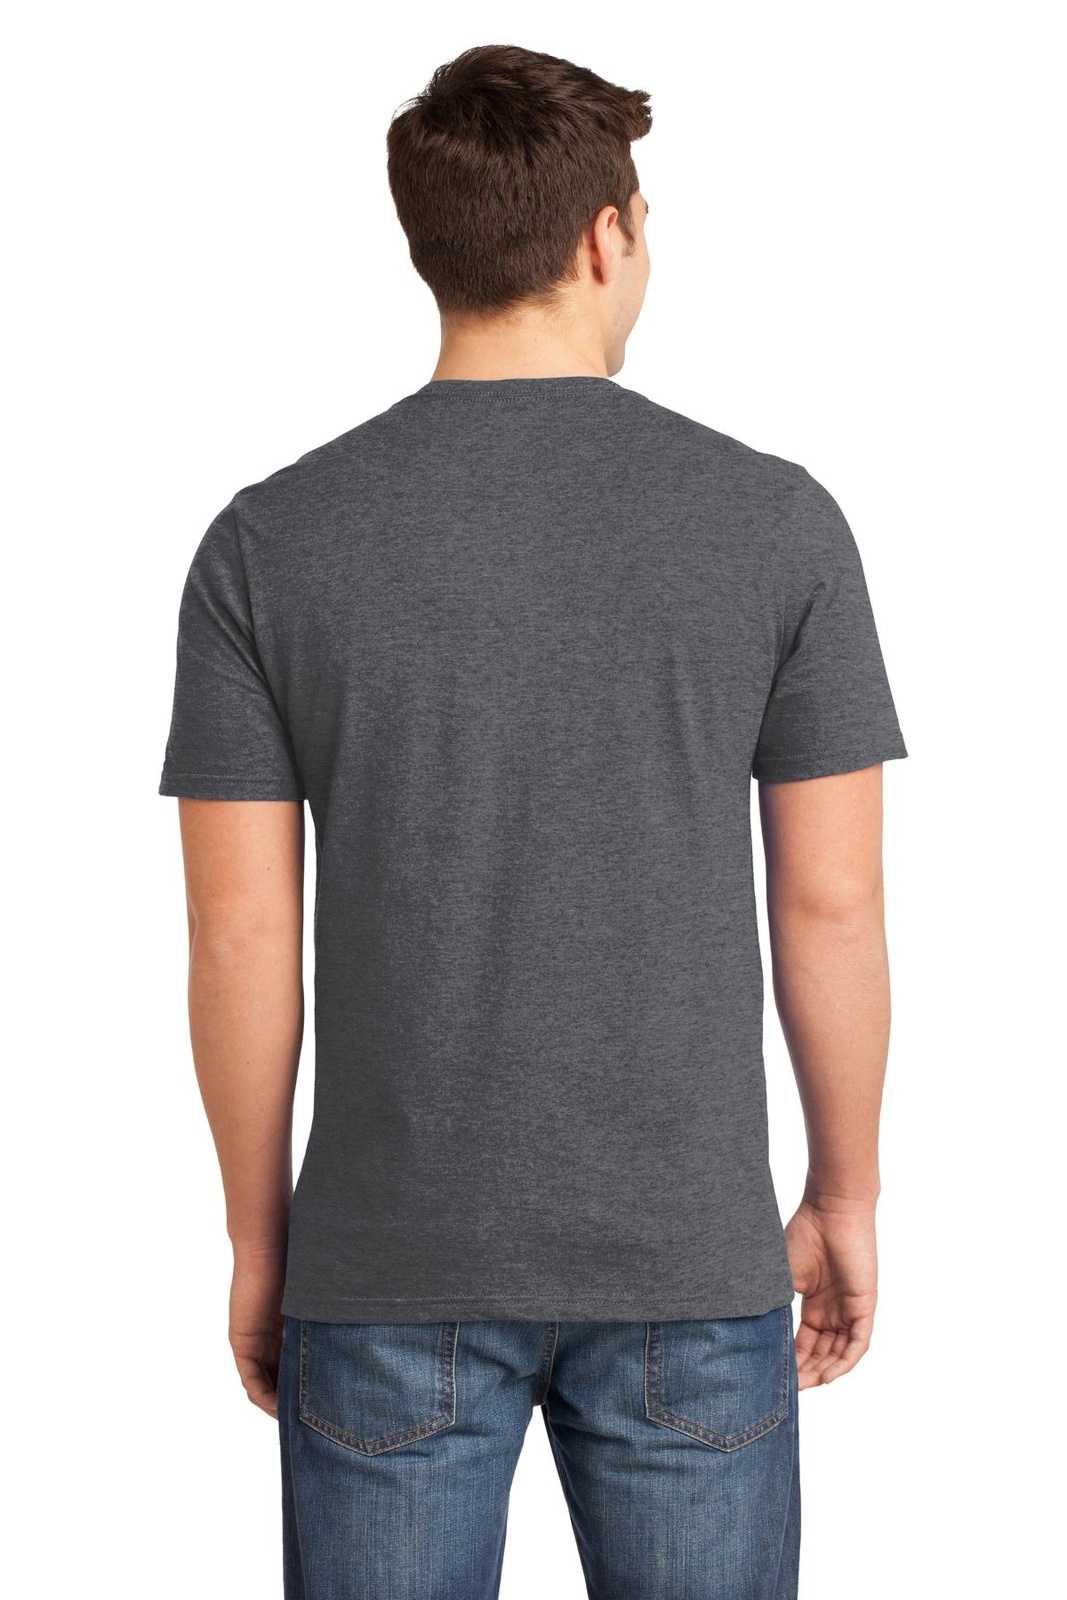 District DT6000 Very Important Tee - Heathered Charcoal - HIT a Double - 2